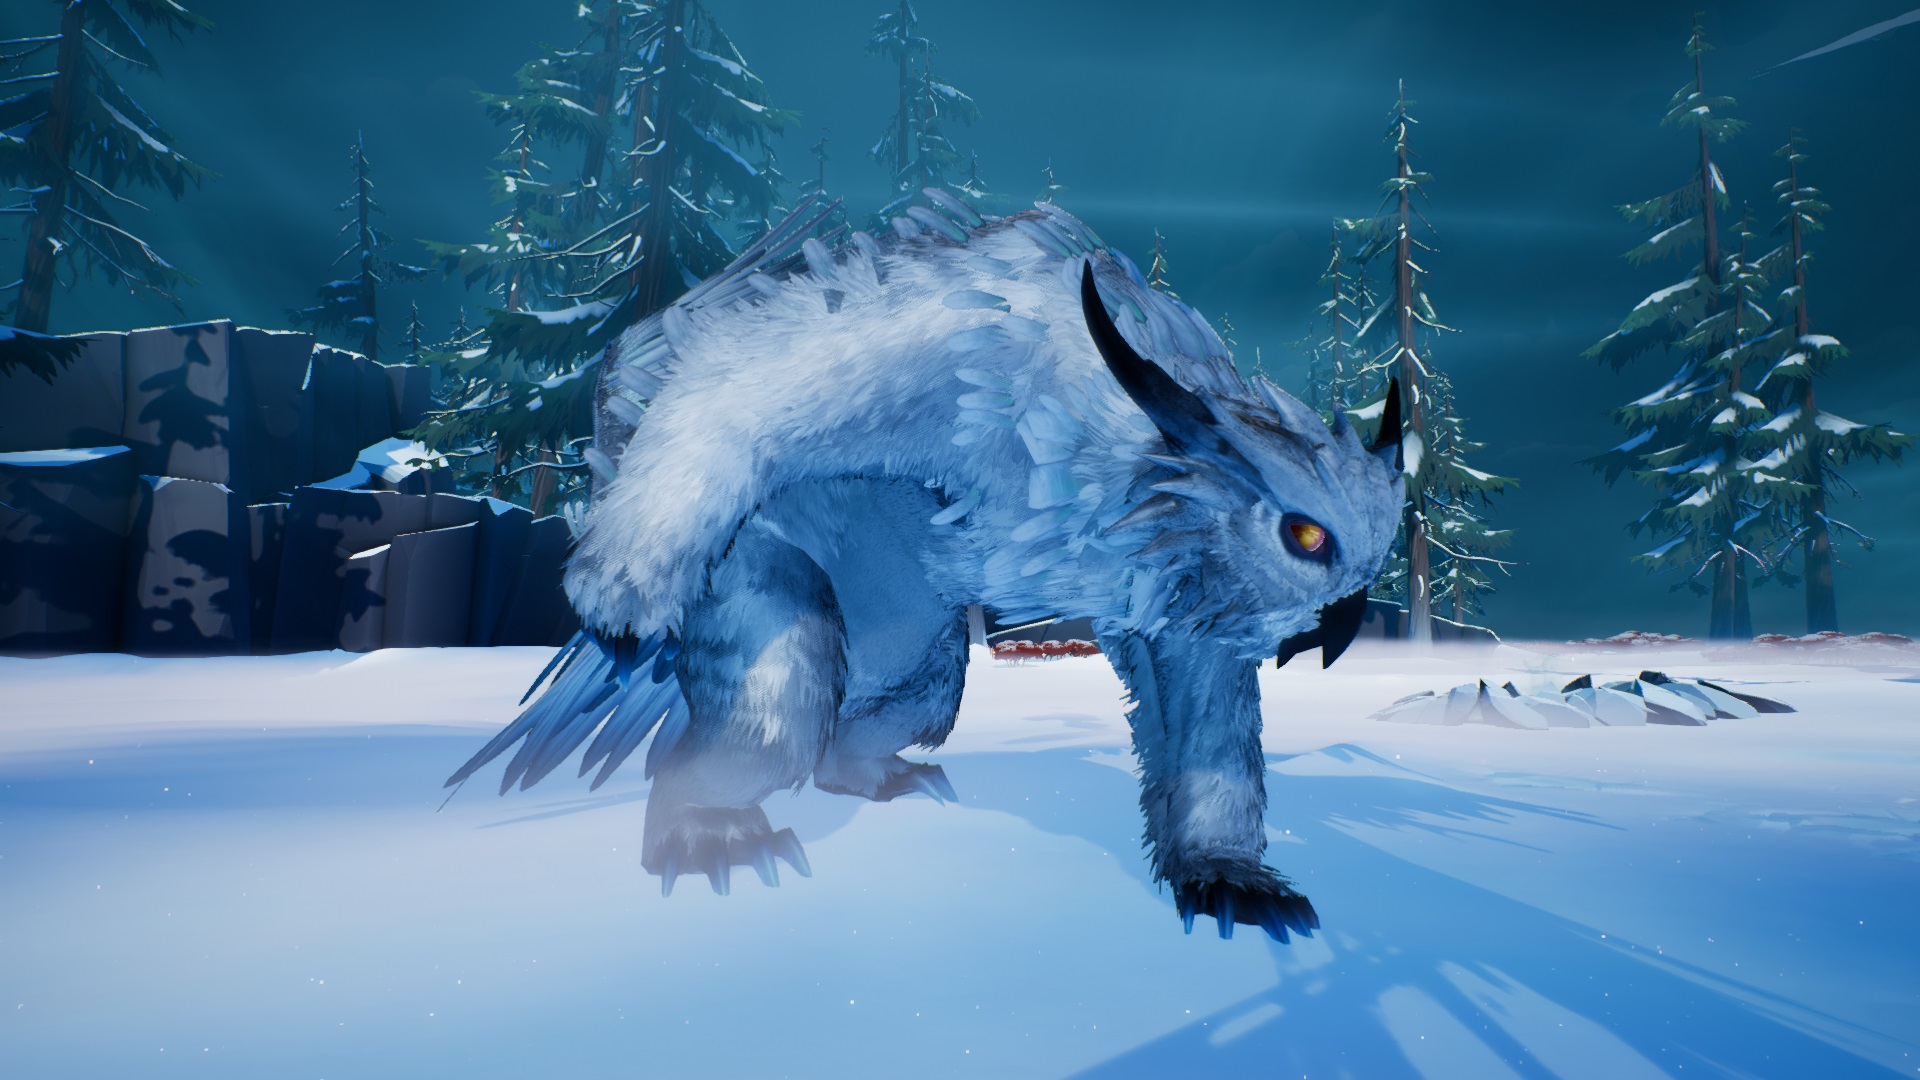 Dauntless – a slayer's guide to monsters |